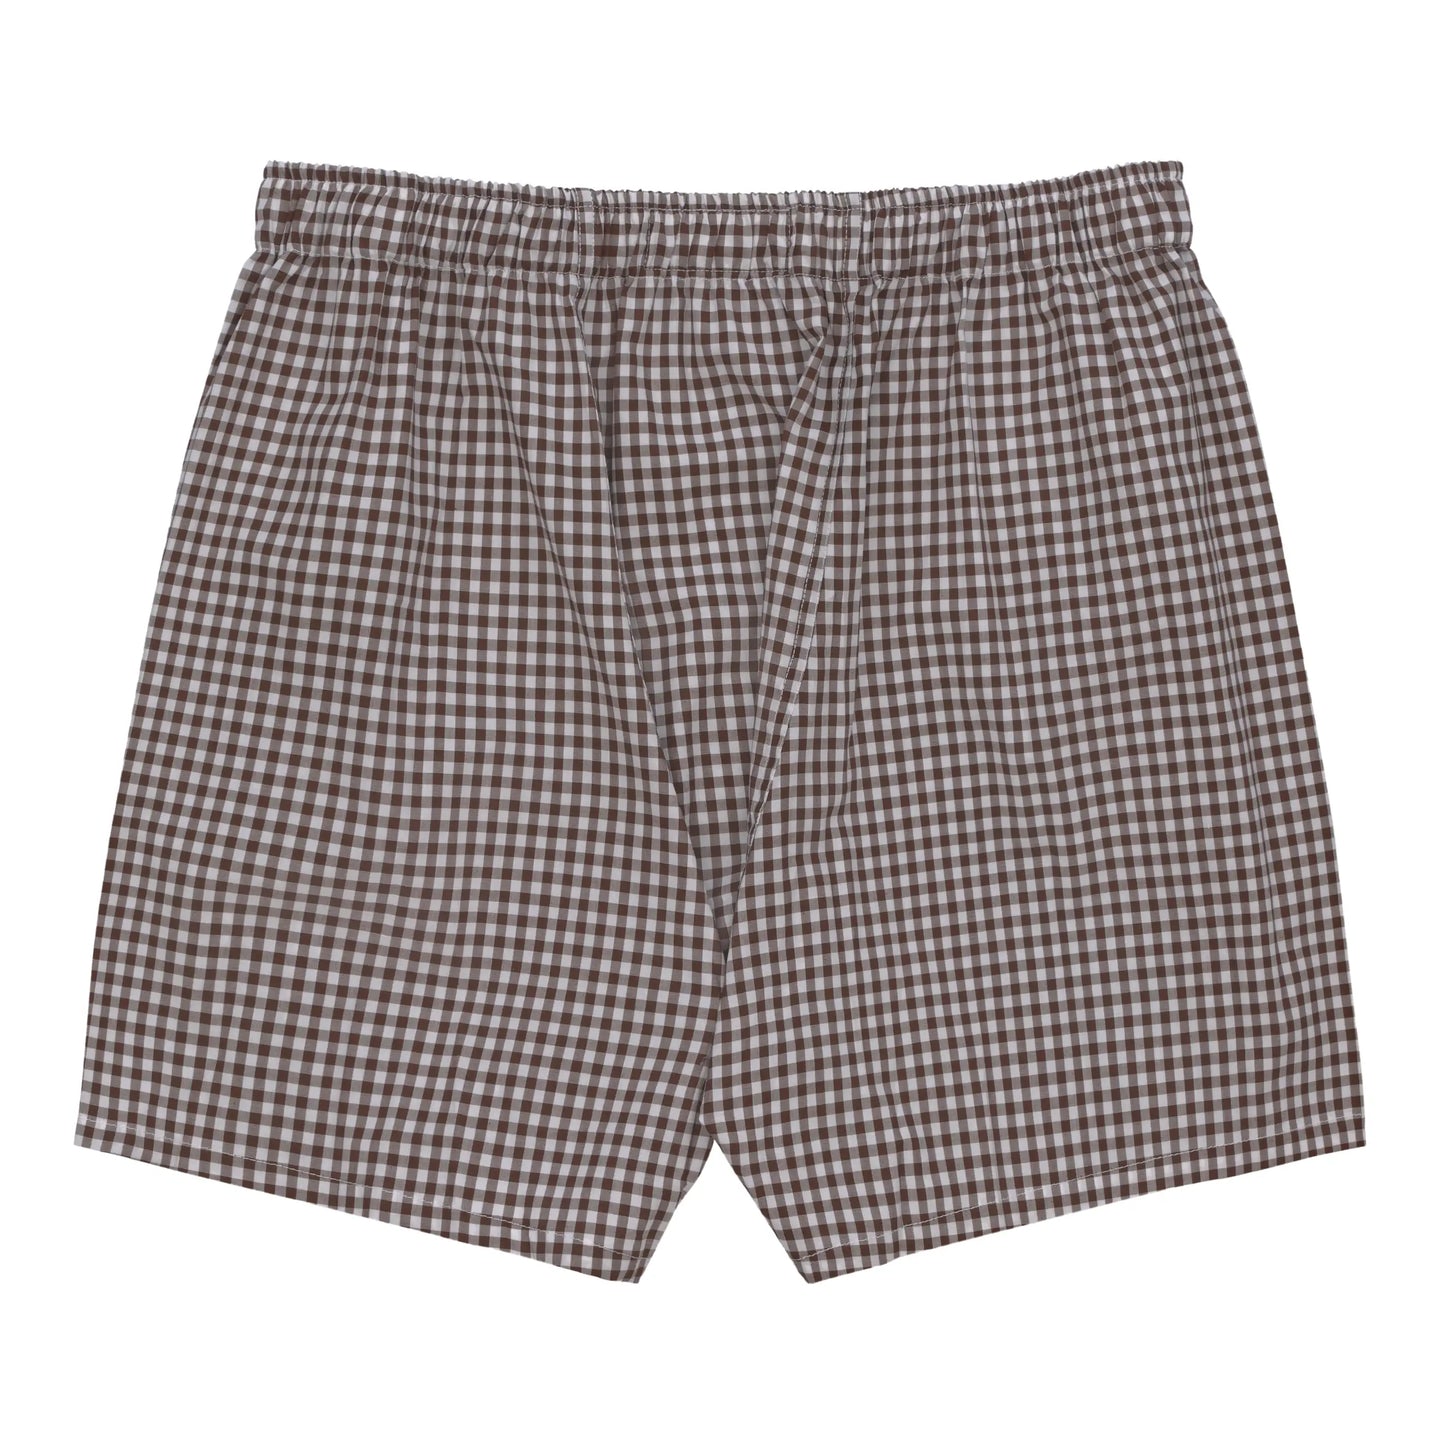 Checked Boxer Shorts in White and Brown